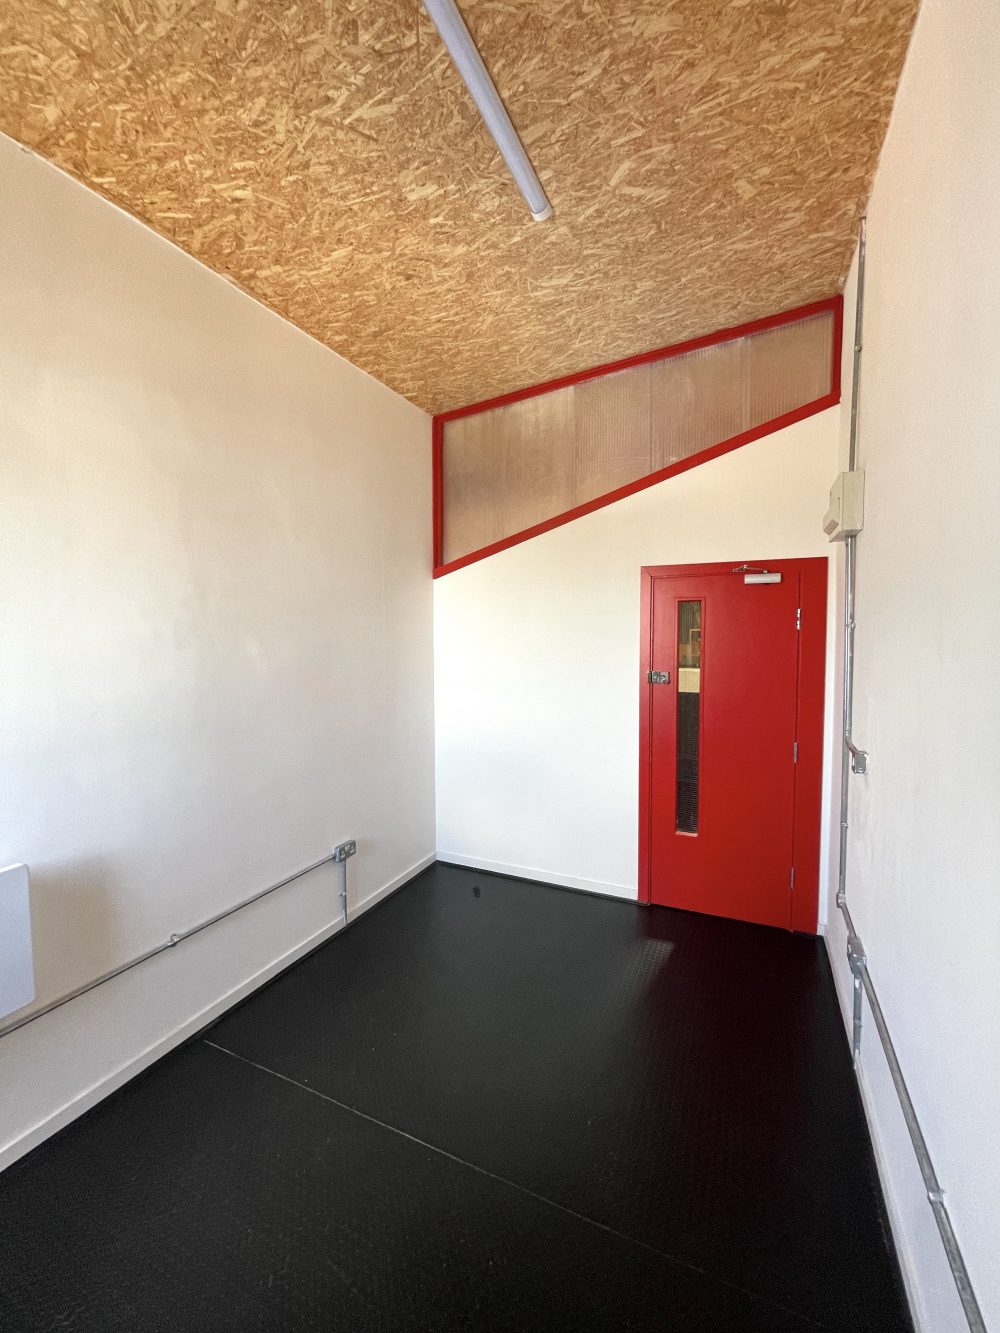 N4 Manor House Eade Road 1st Floor Unit To rent in Creative Warehouse Hub North London47